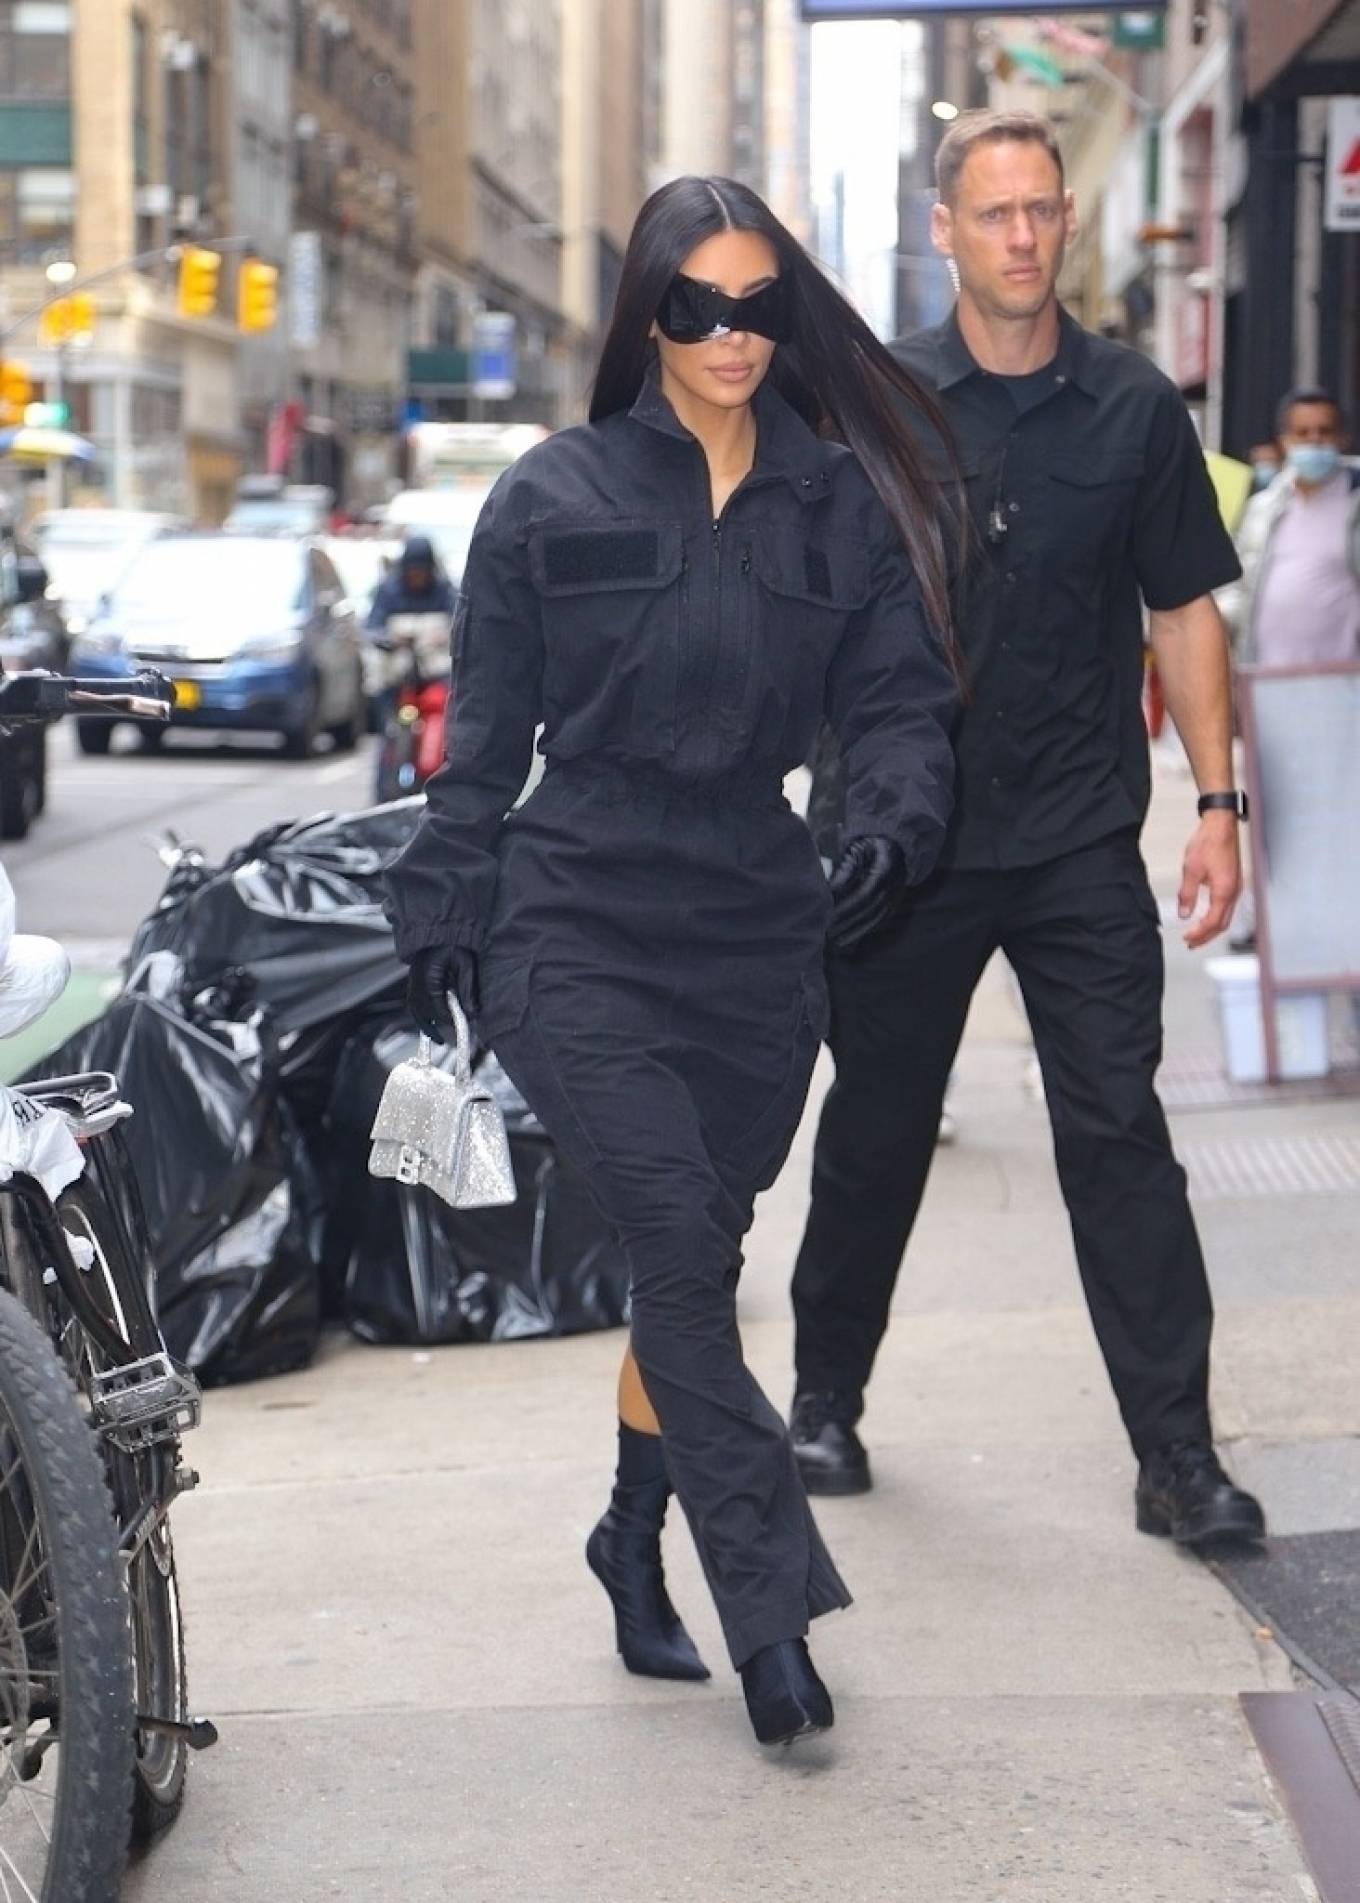 Kim Kardashian - steps out in head-to-toe Balenciaga as she heads out in New York City